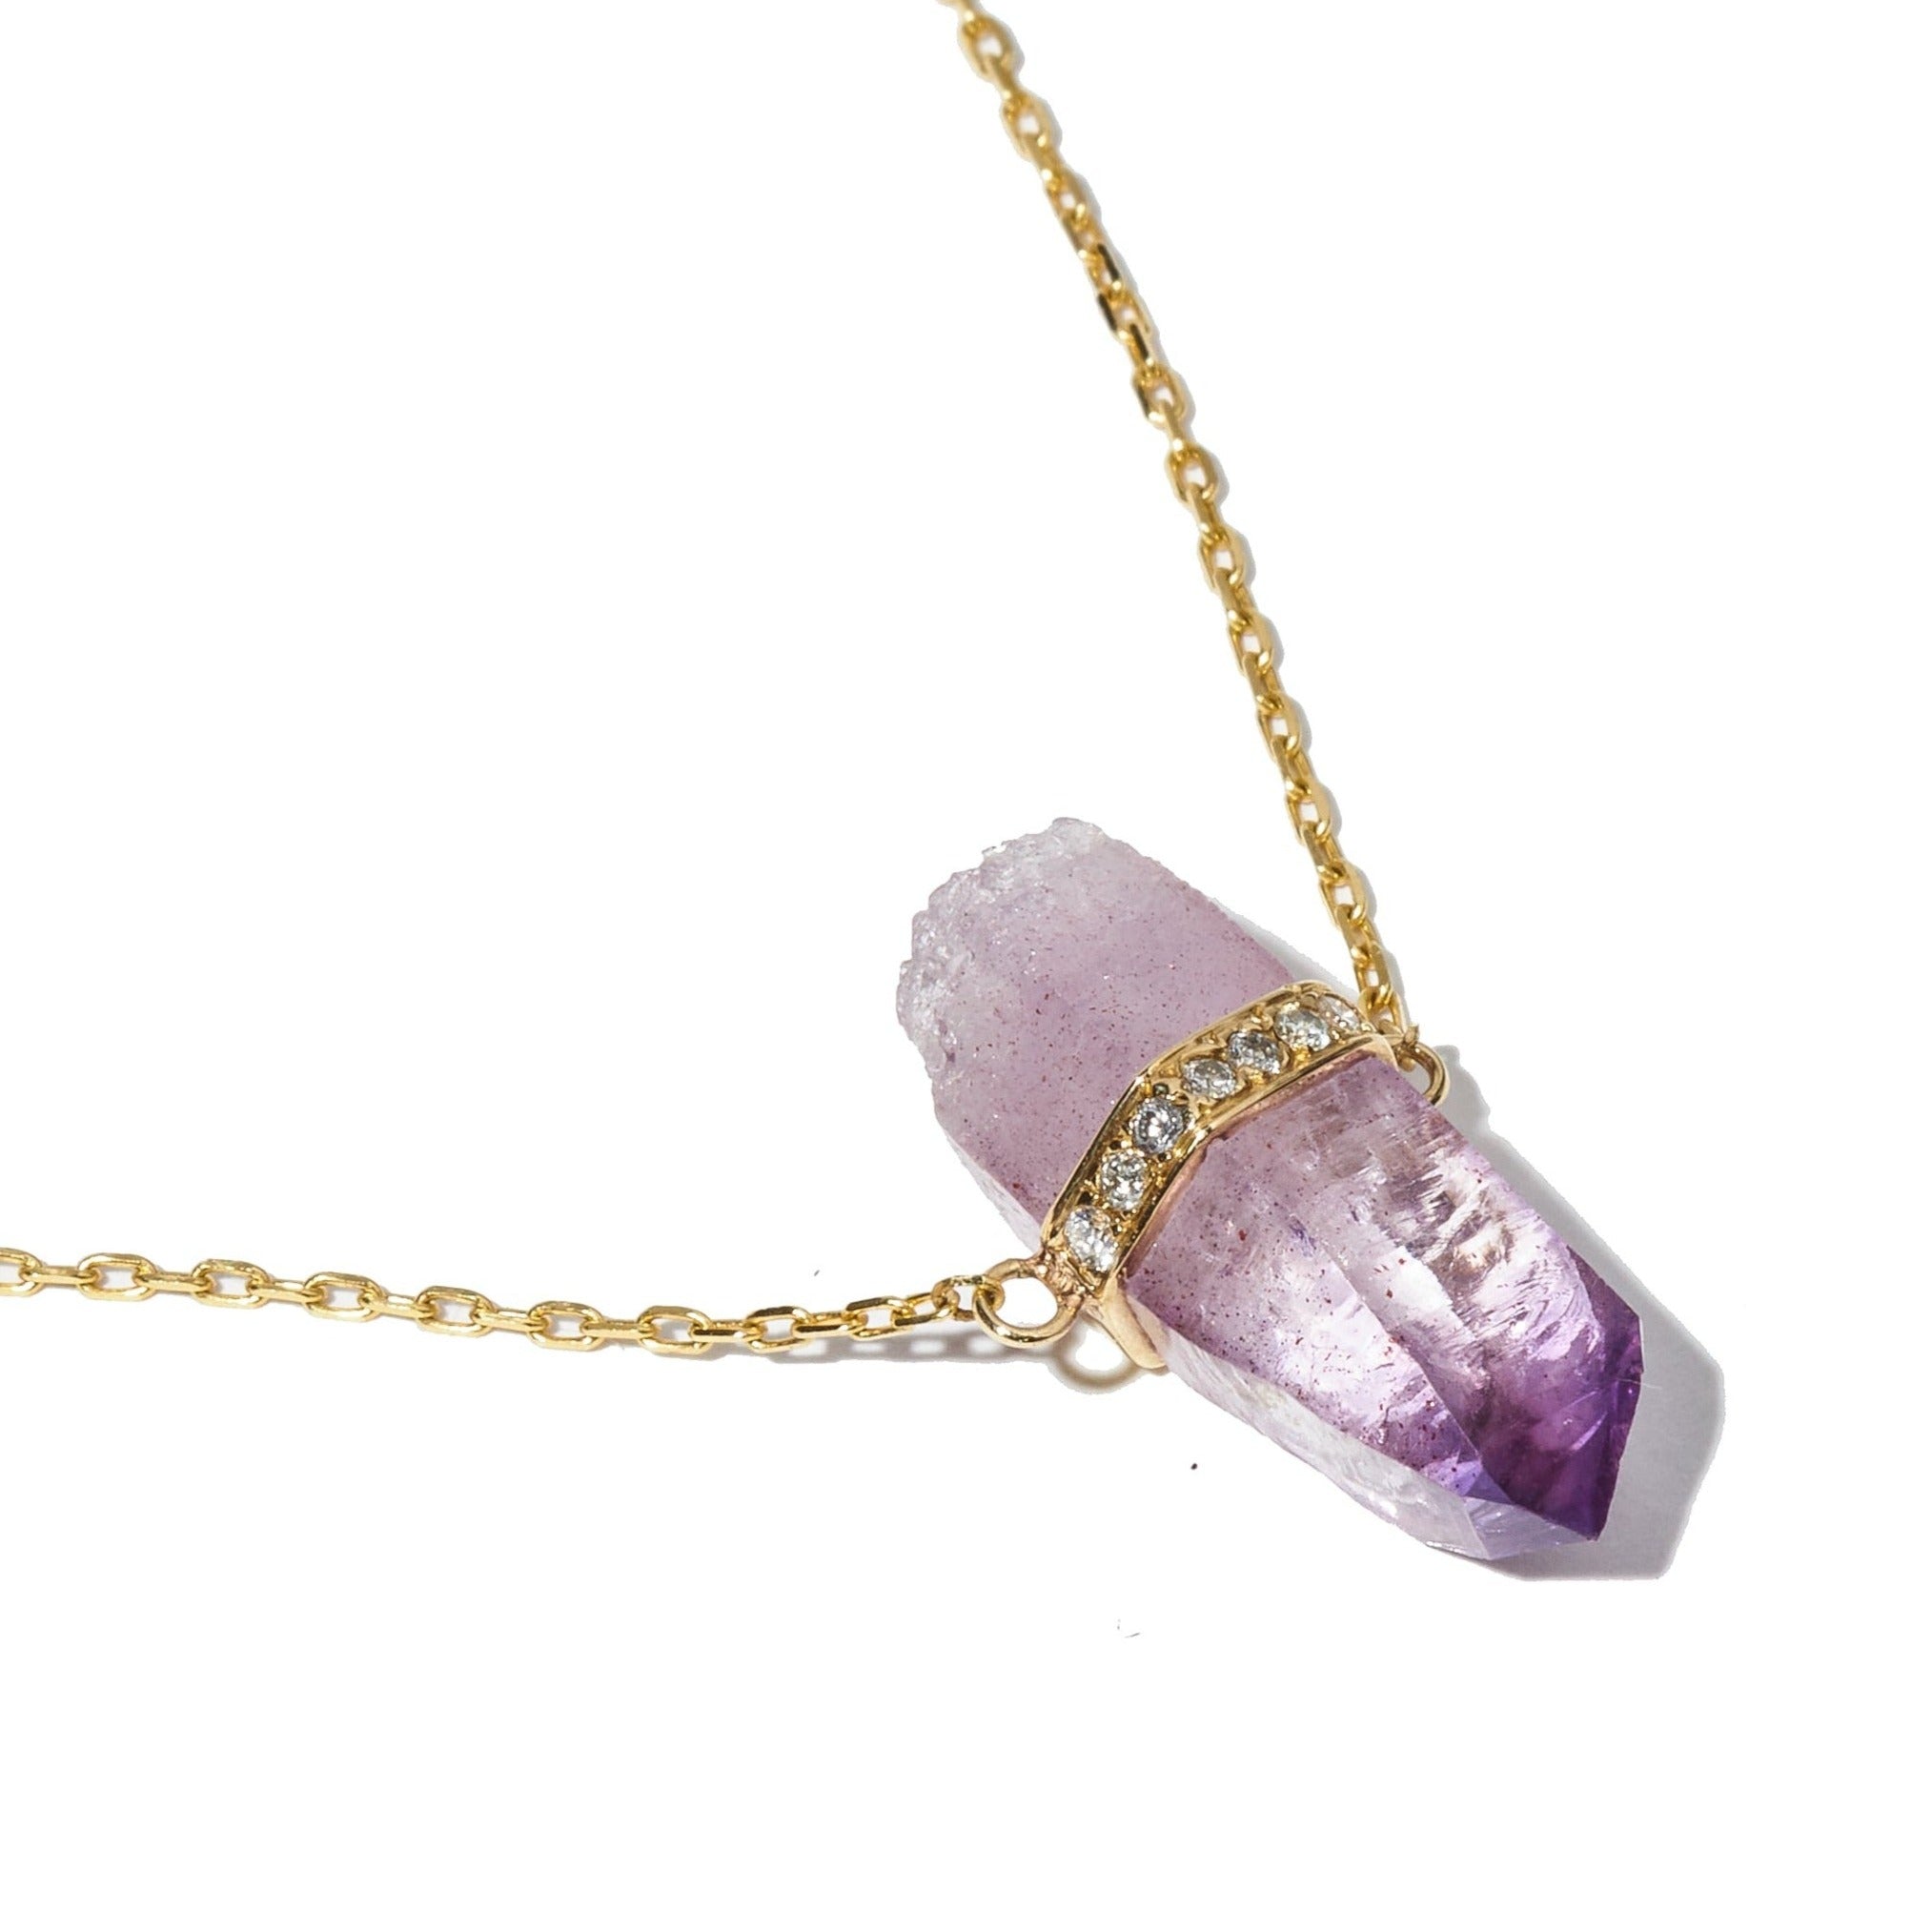 Buy Amethyst Necklace Online From Premium Crystal Store at Best Price - The  Miracle Hub